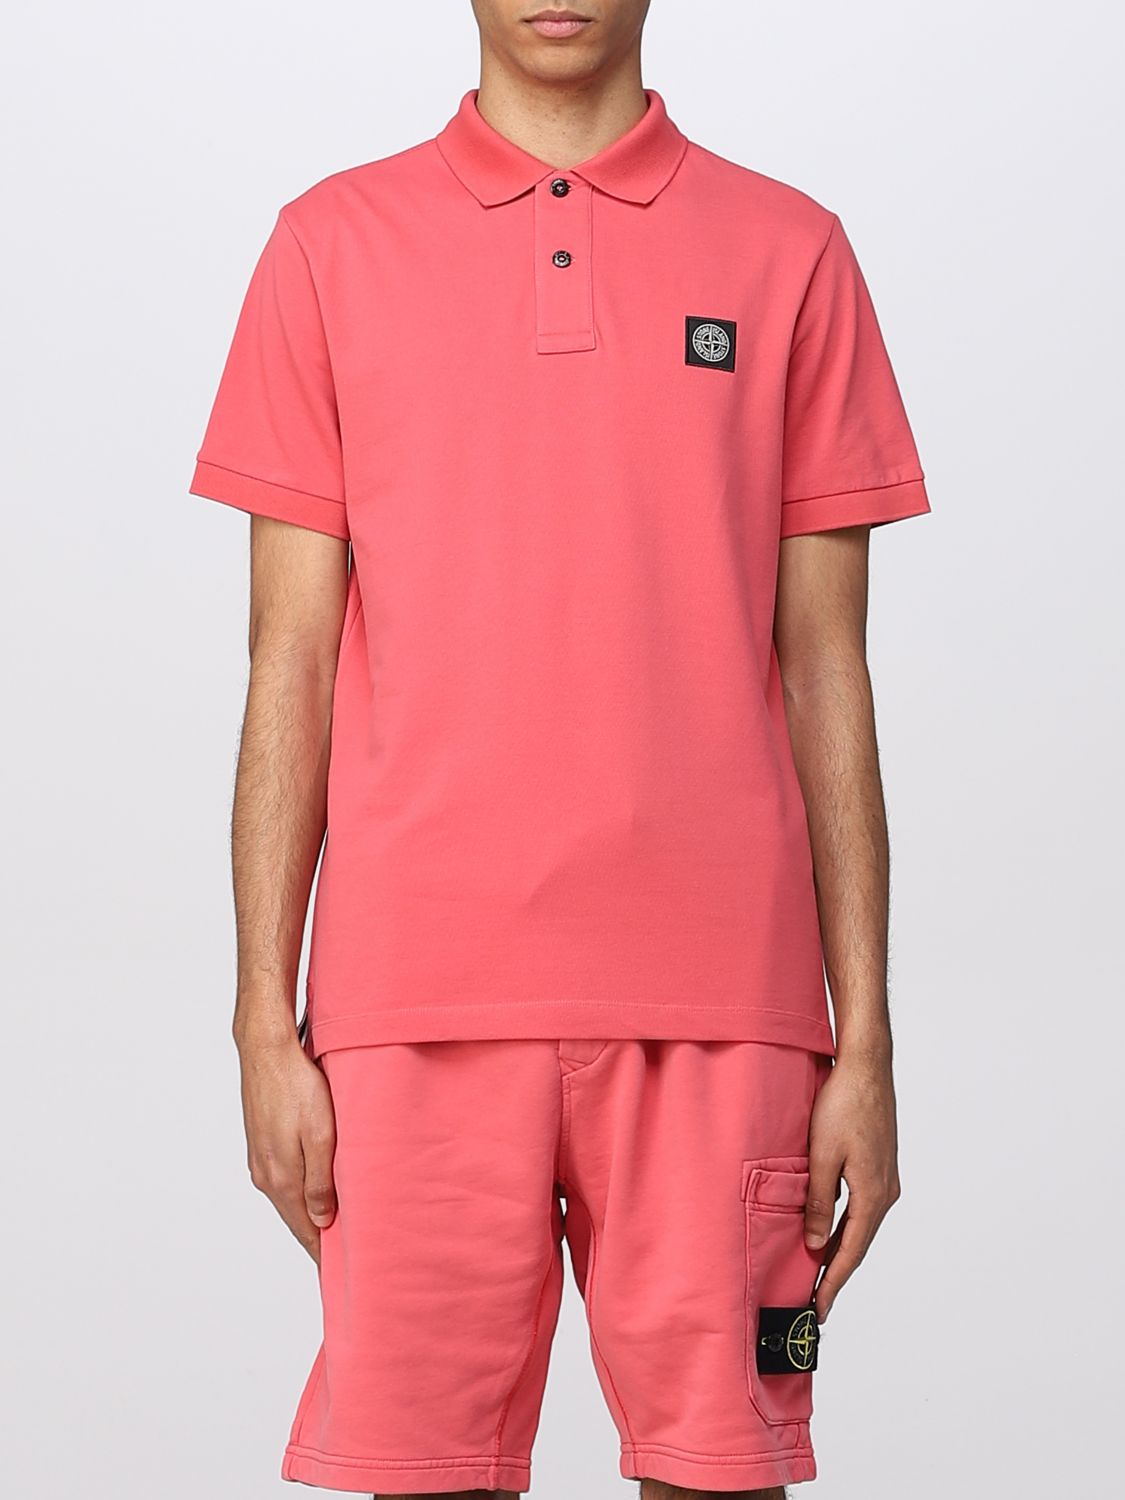 STONE ISLAND POLO SHIRT STONE ISLAND MEN COLOR ORCHID,D88215258